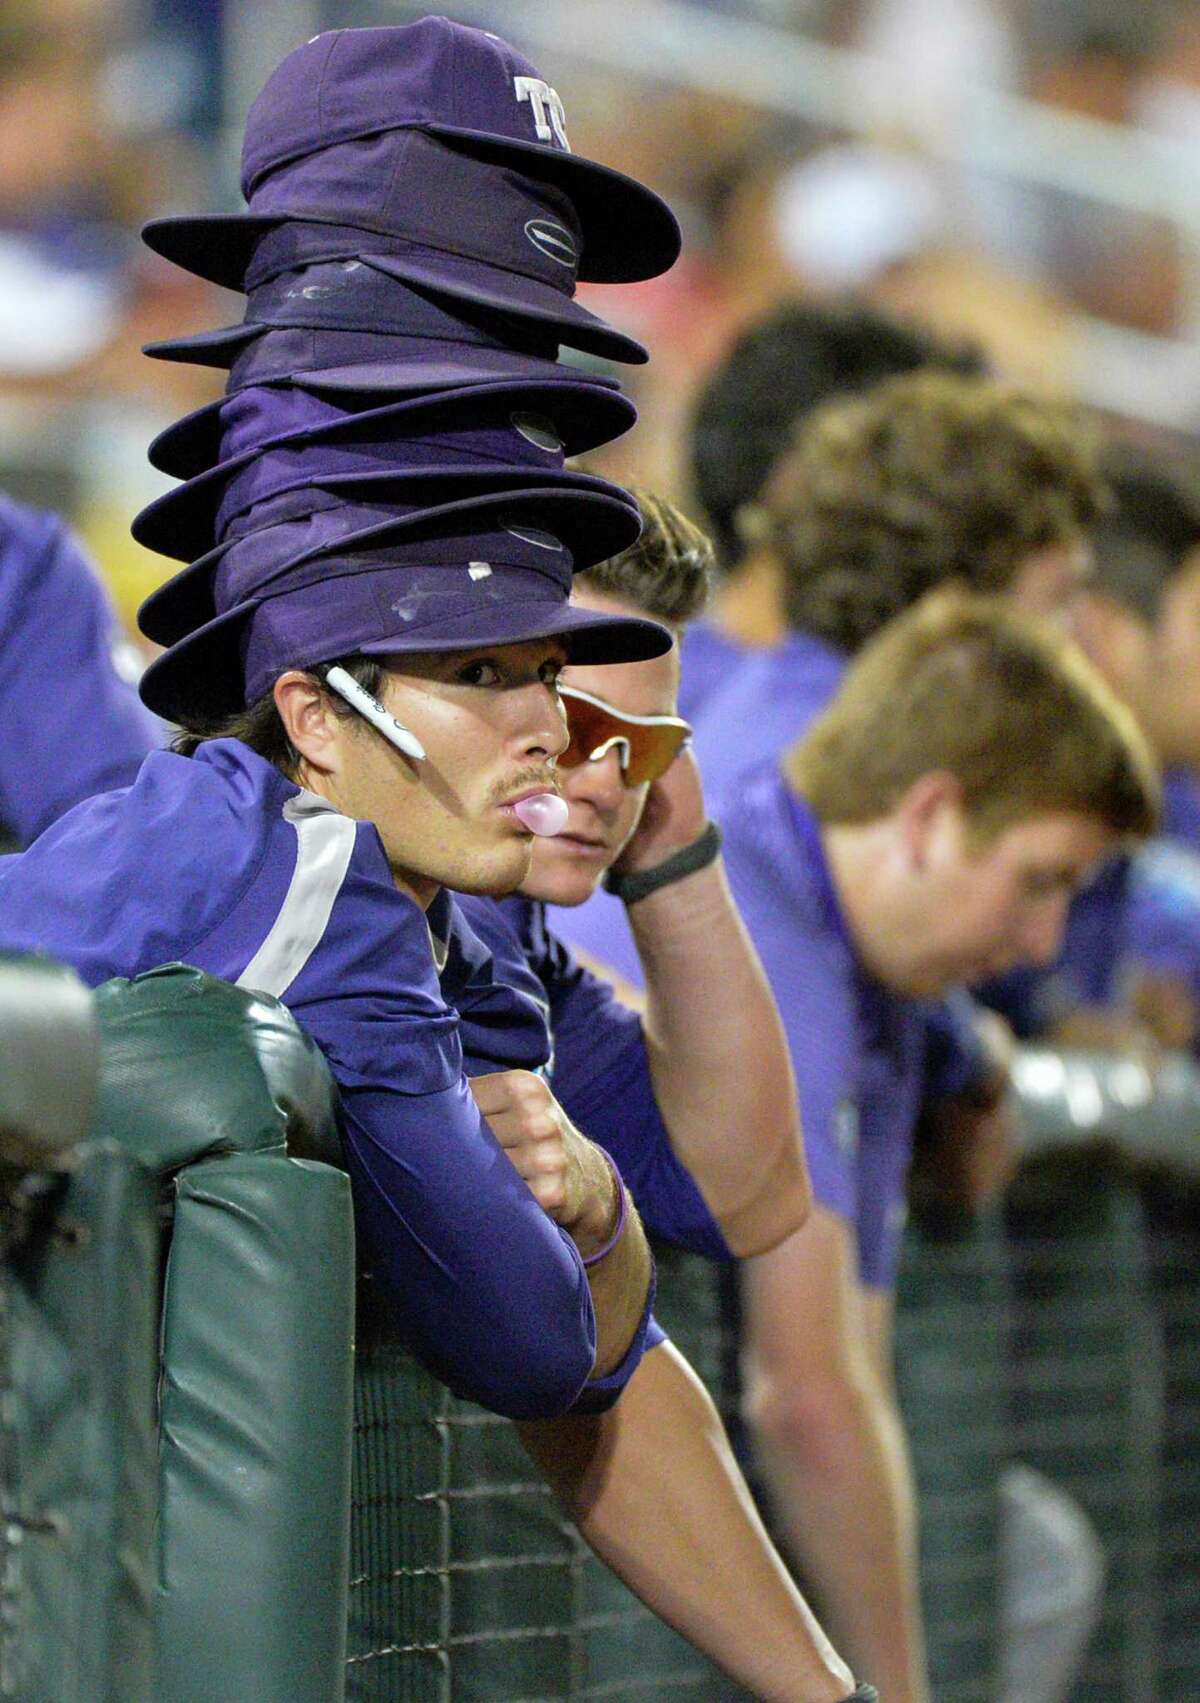 No matter how many rally caps pitcher Preston Morrison stacked, TCU couldn't muster any offense.